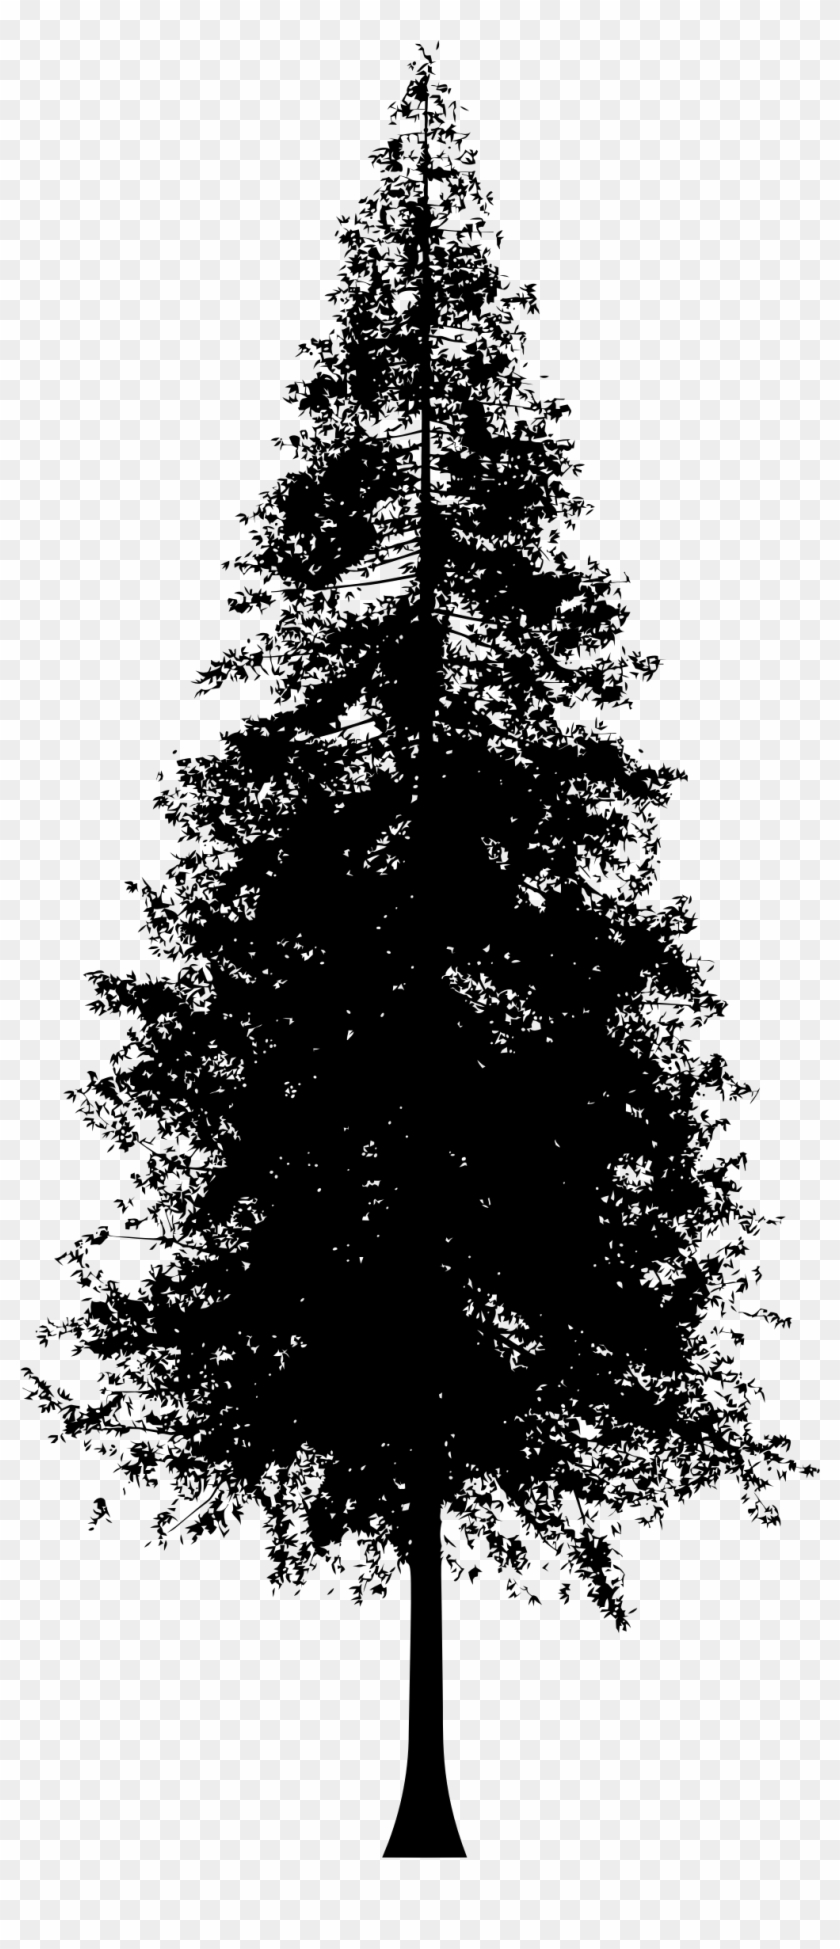 Redwood Tree Silhouette Graphic Stock - Redwood Tree Silhouette Vector Clipart #47631